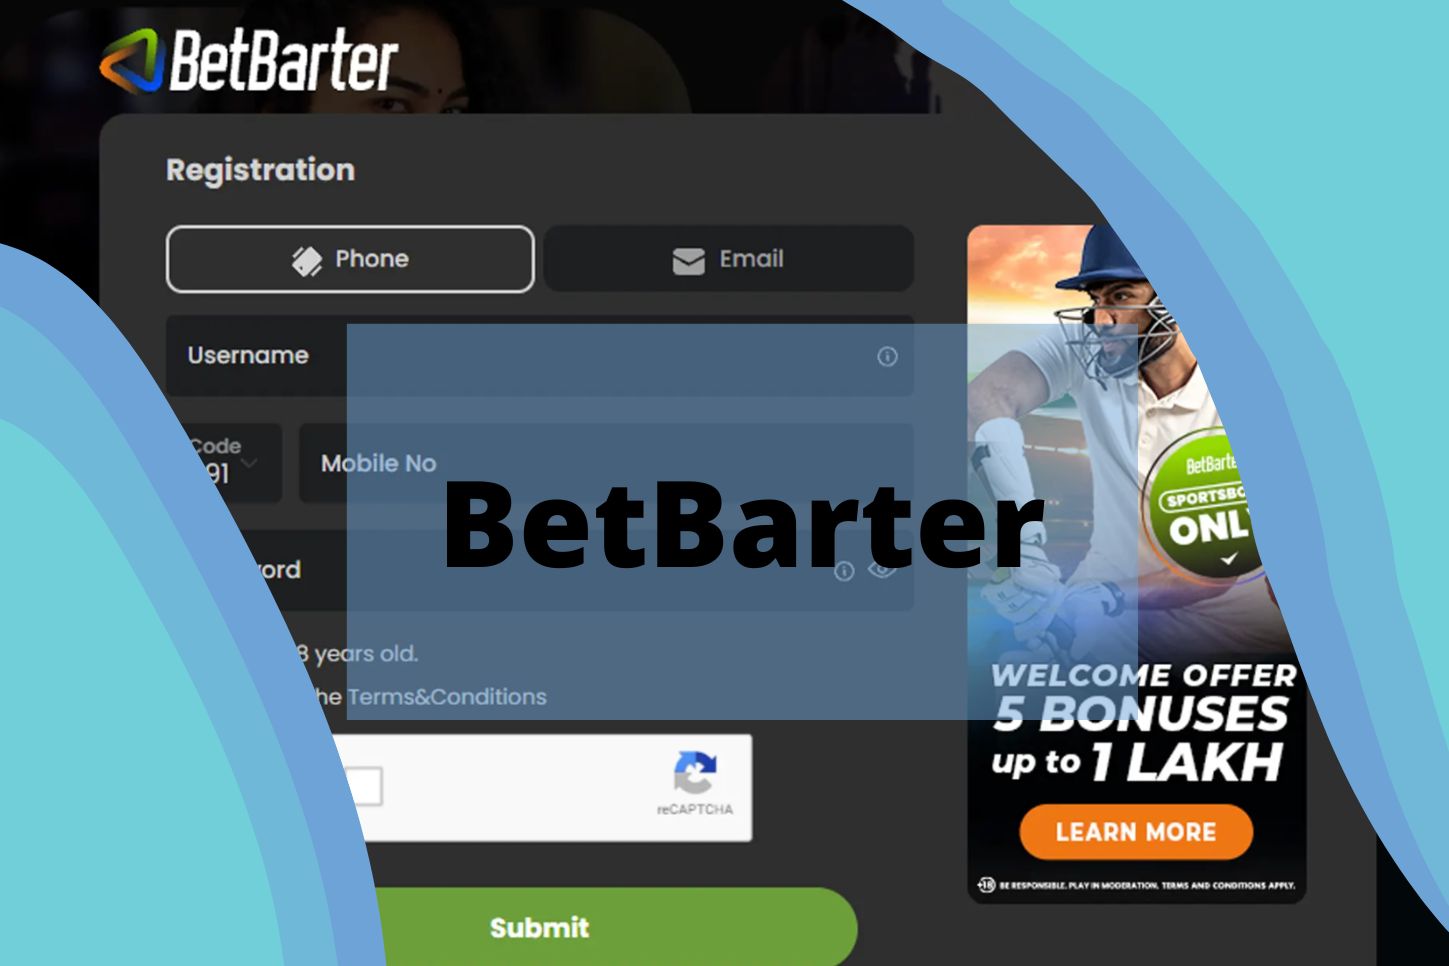 Get started now at BetBarter betting website